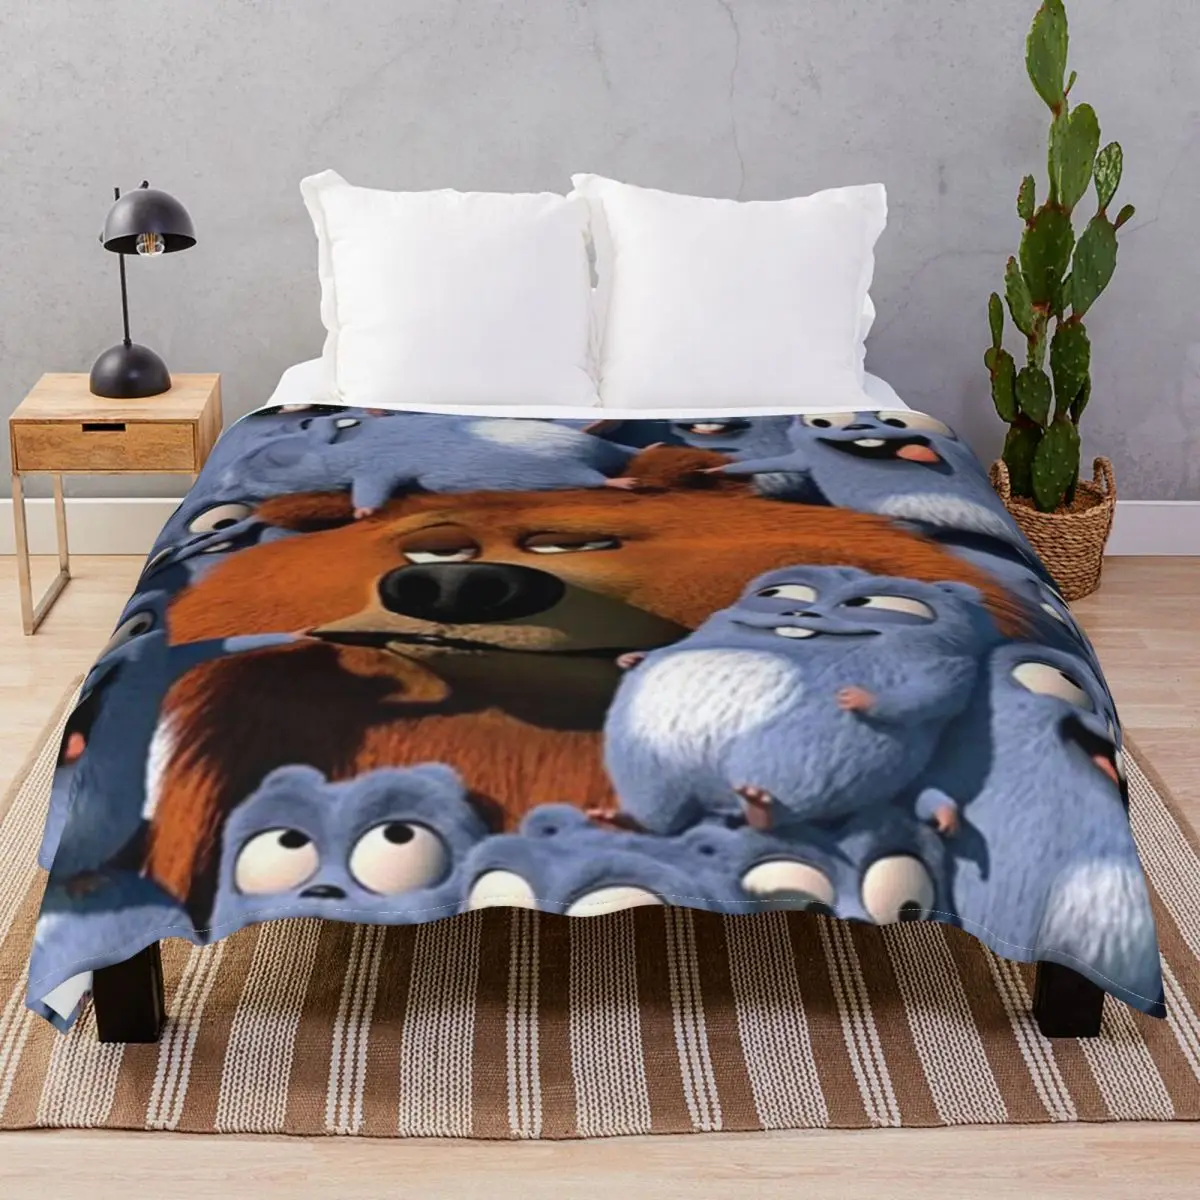 Grizzy And The Lemmings Blankets Flannel Summer Warm Unisex Throw Blanket for Bedding Sofa Camp Office